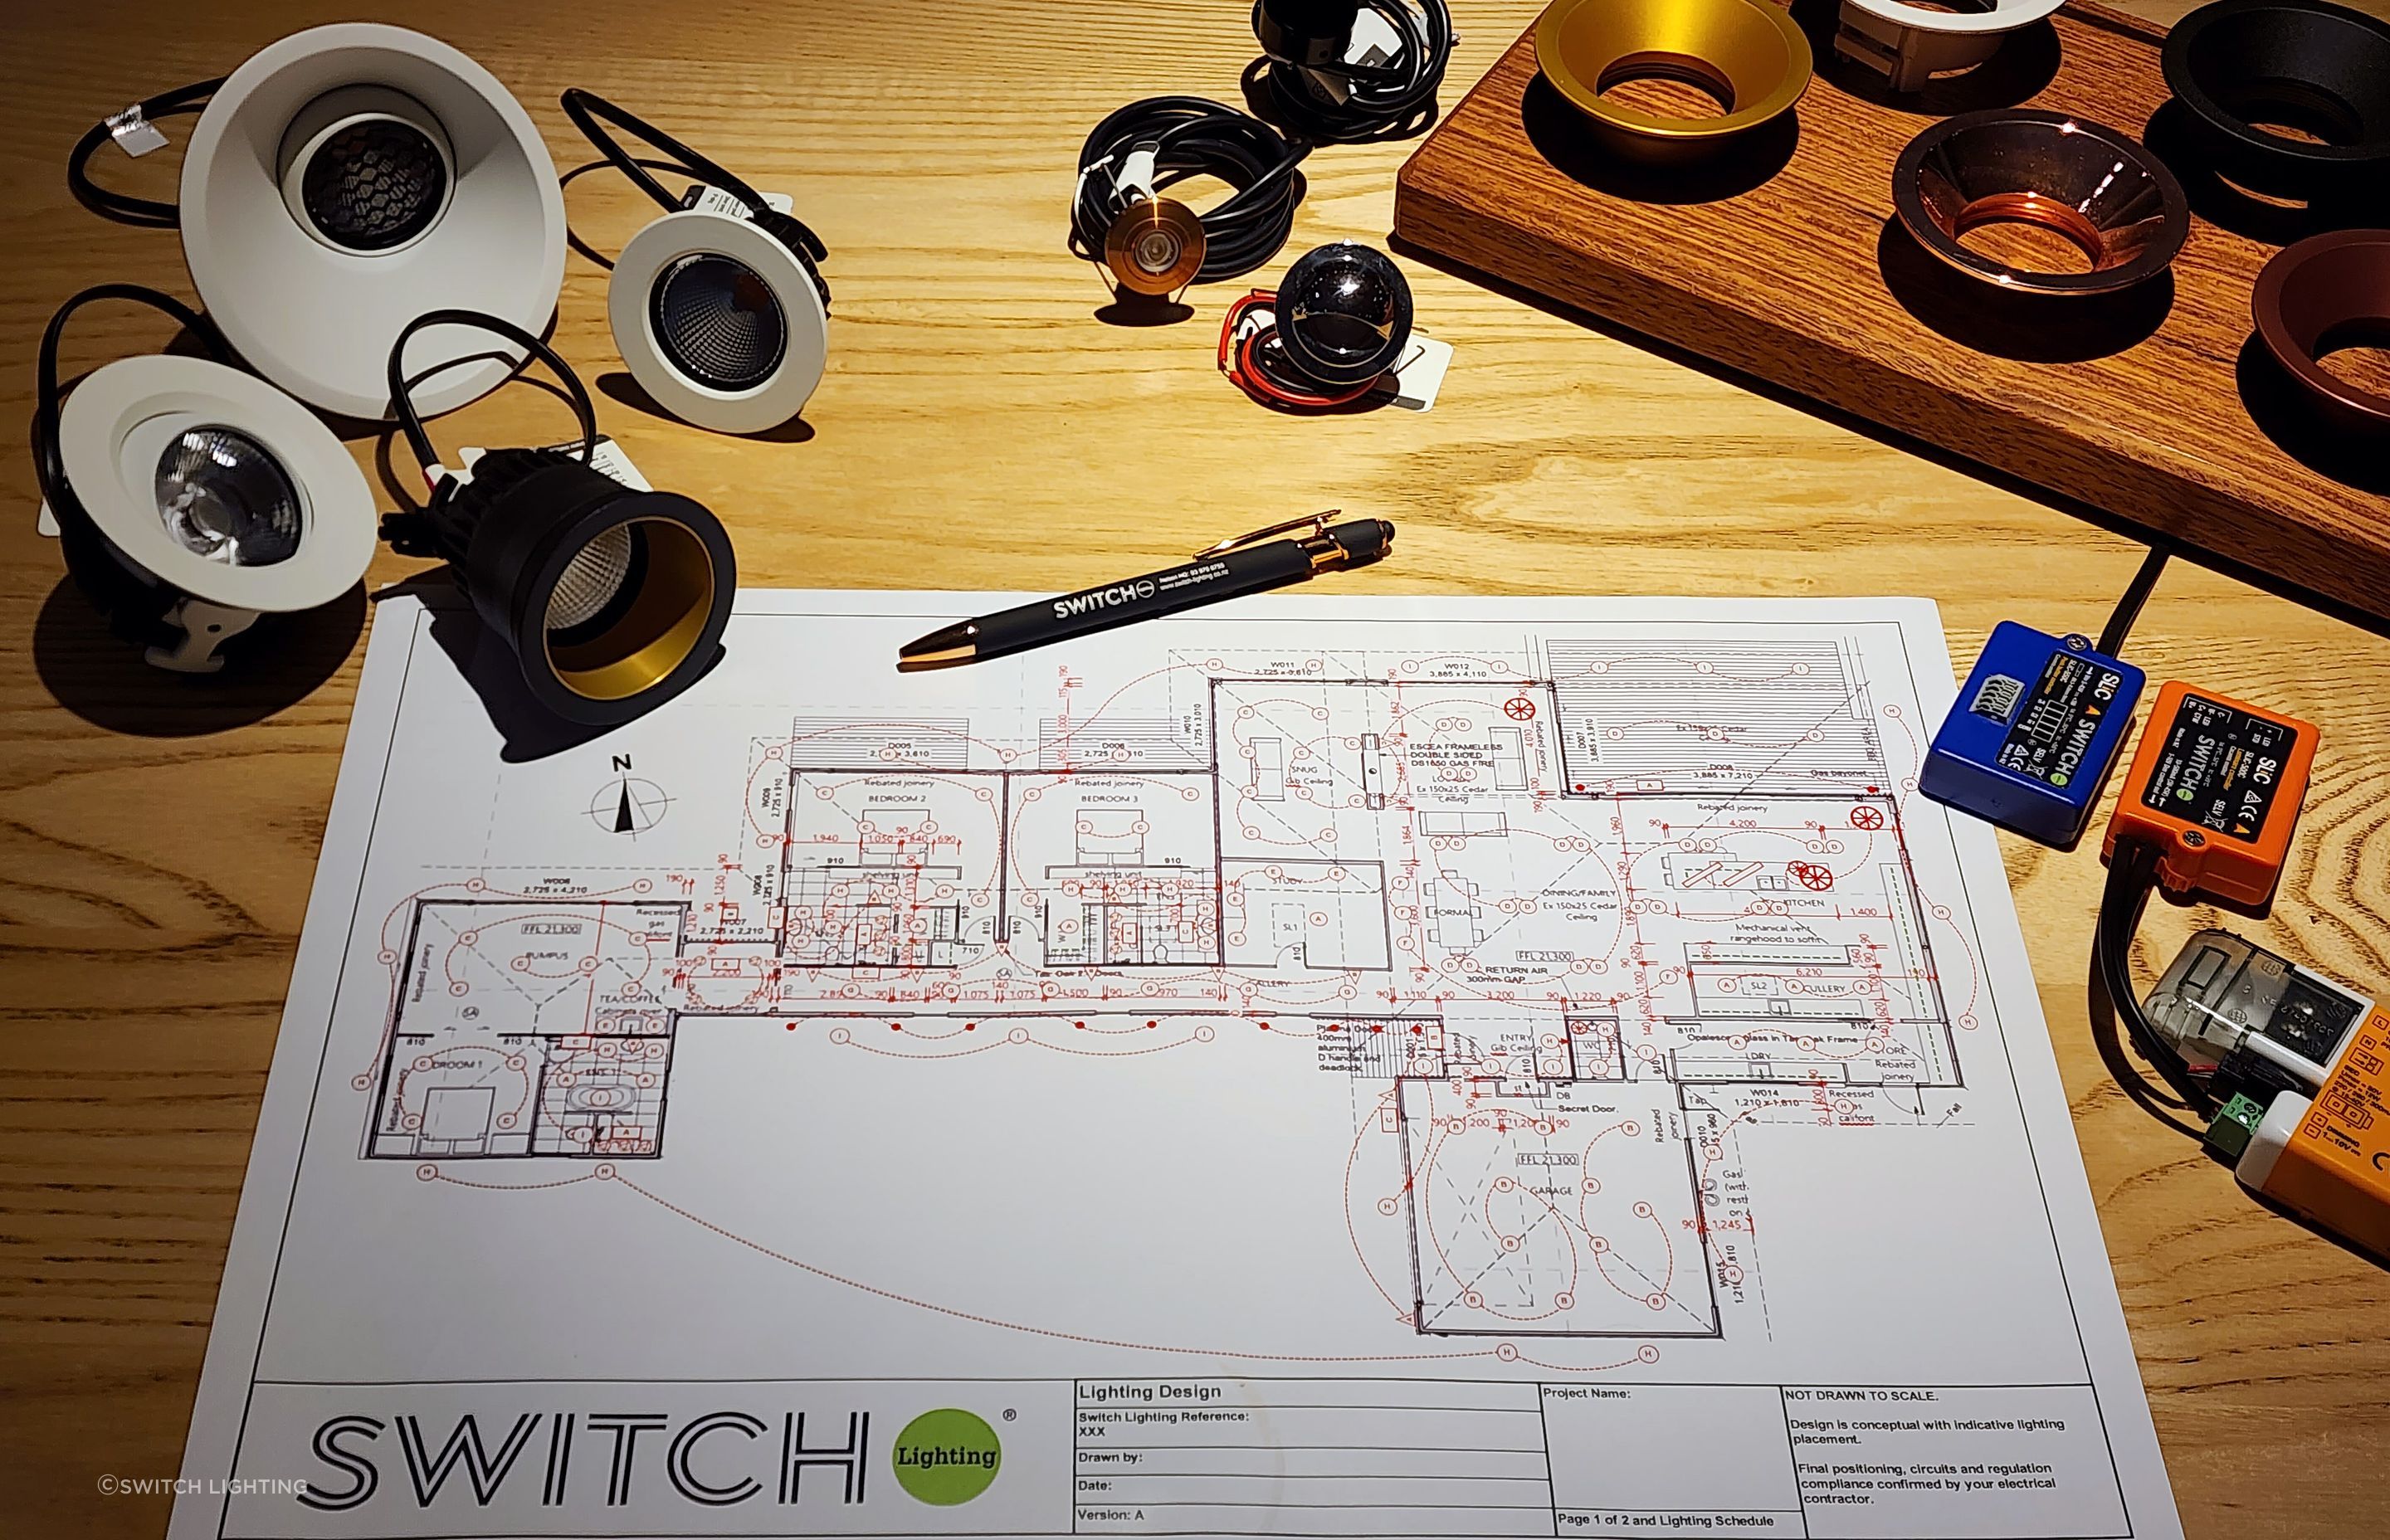 Switch Lighting's expert lighting consultants can help you put together the perfect lighting plan for your home.